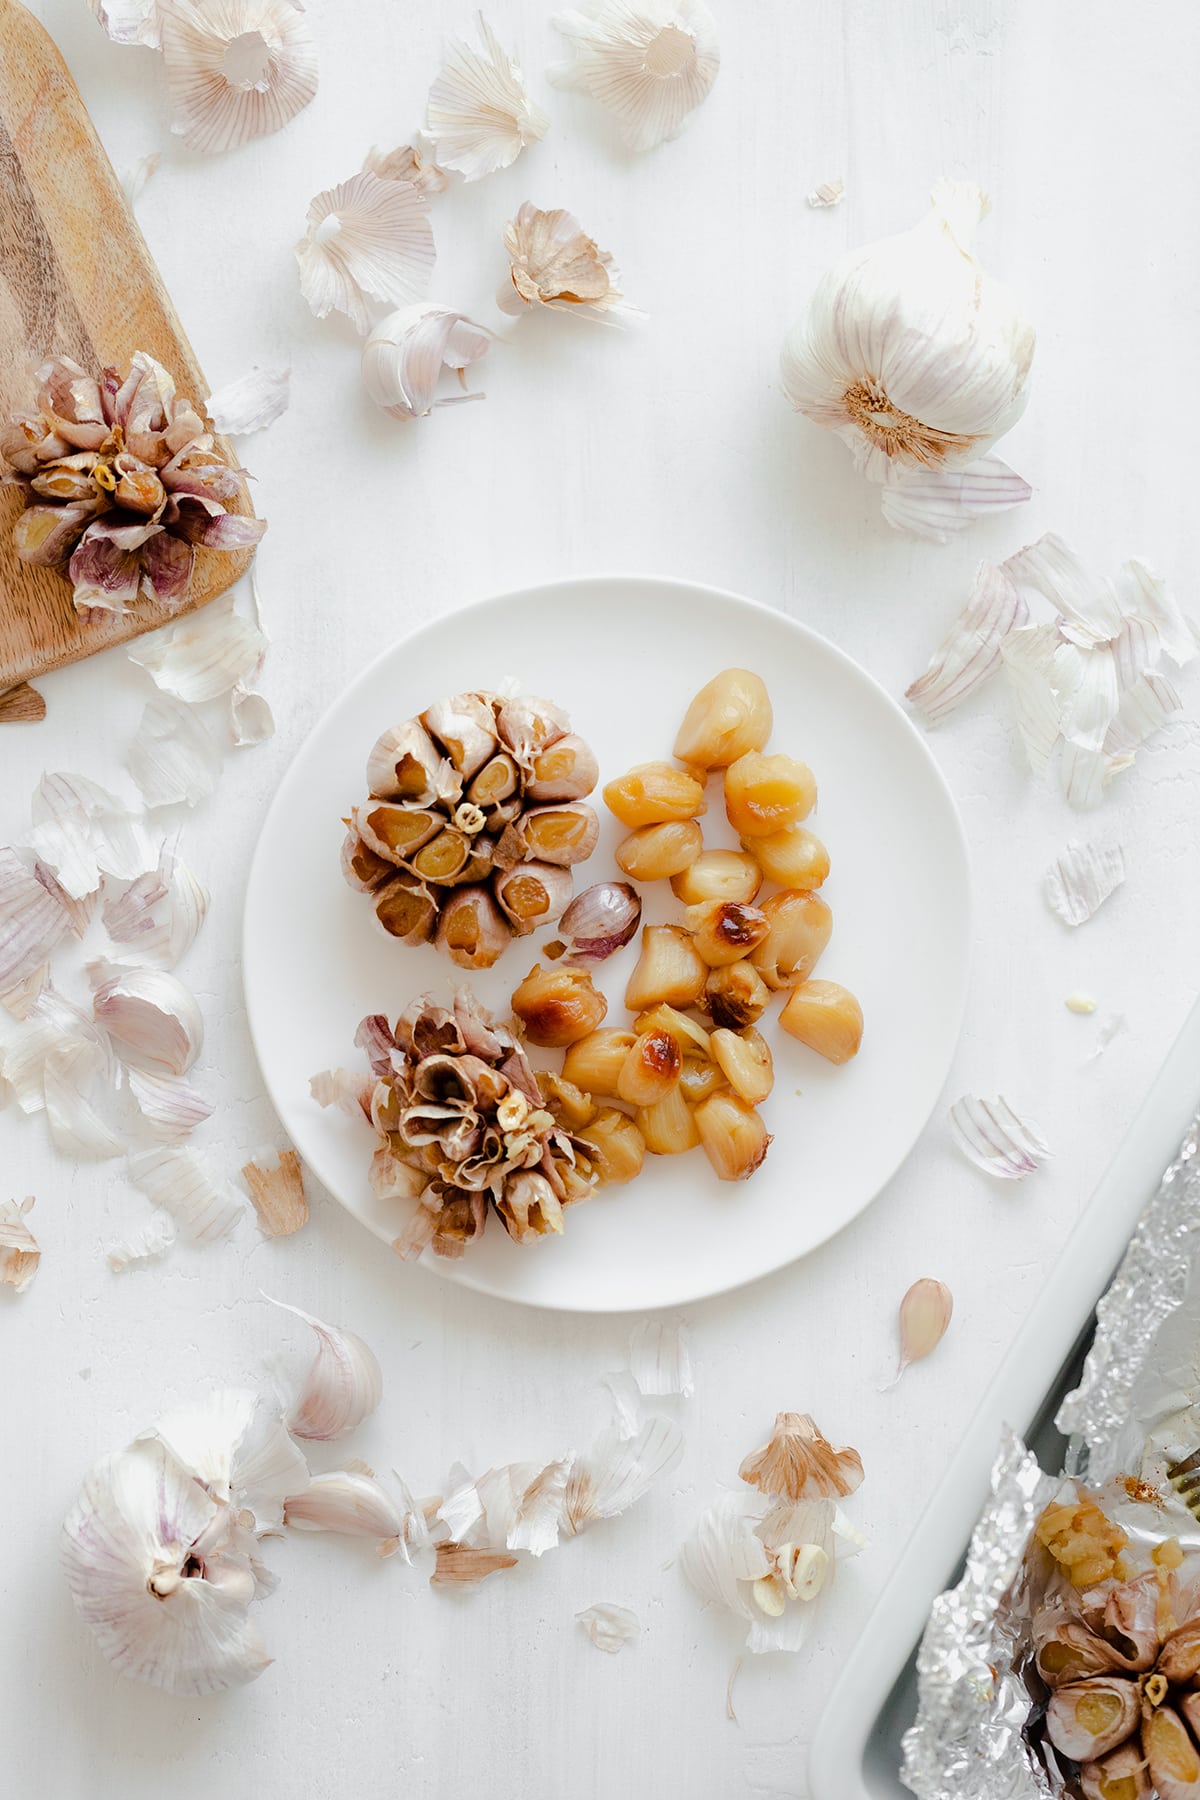 A white plat on white background with roasted garlic on it. Two bulbs, one full, one empty with the roasted garlic cloves on the right side of the plate.